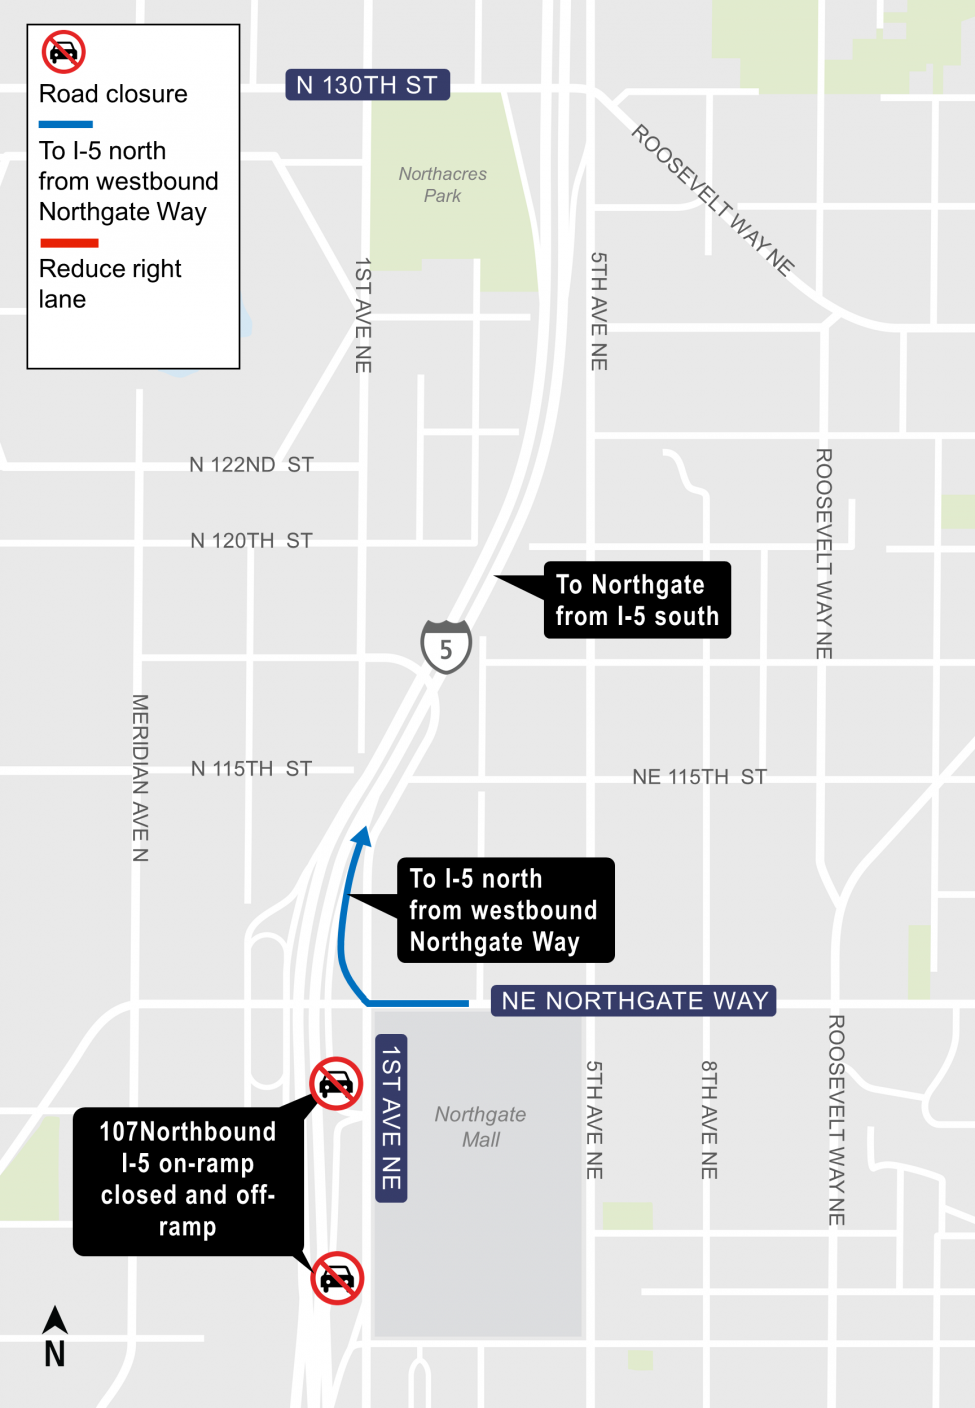 Map of on-ramp and off-ramp closures in Northgate.